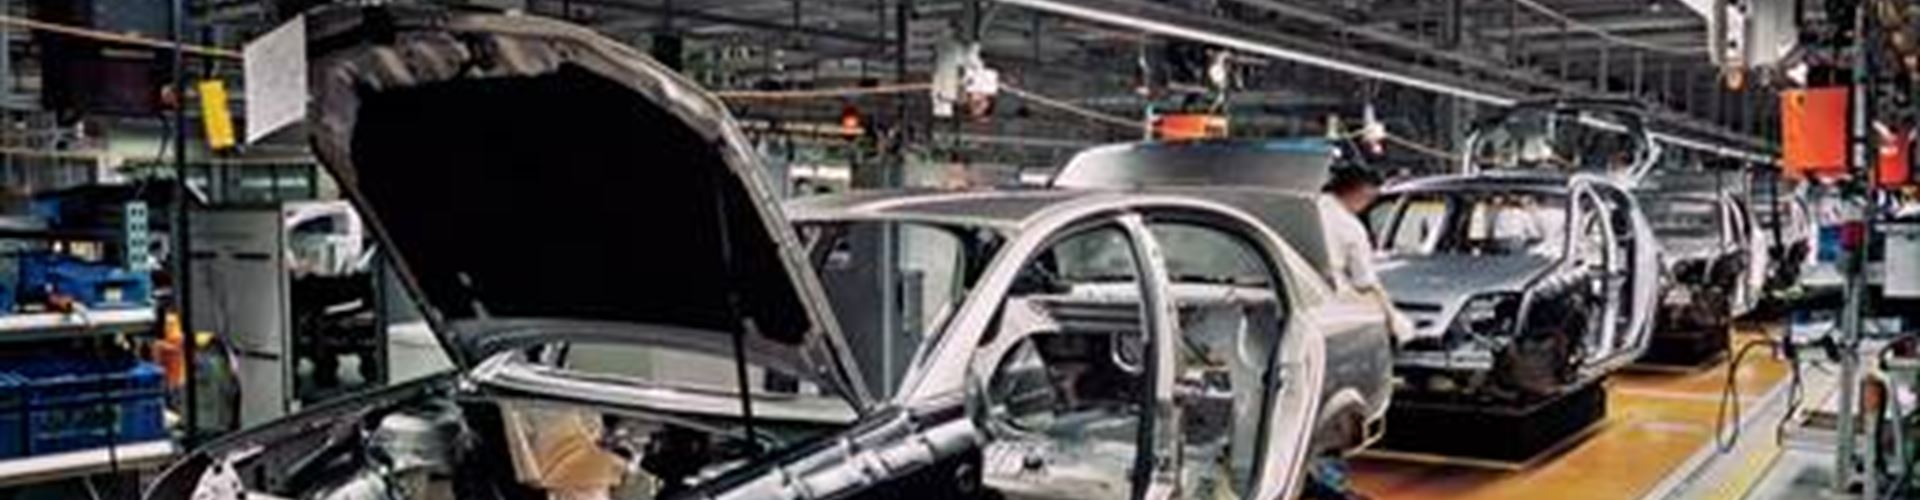 Ten-year high for UK car production 